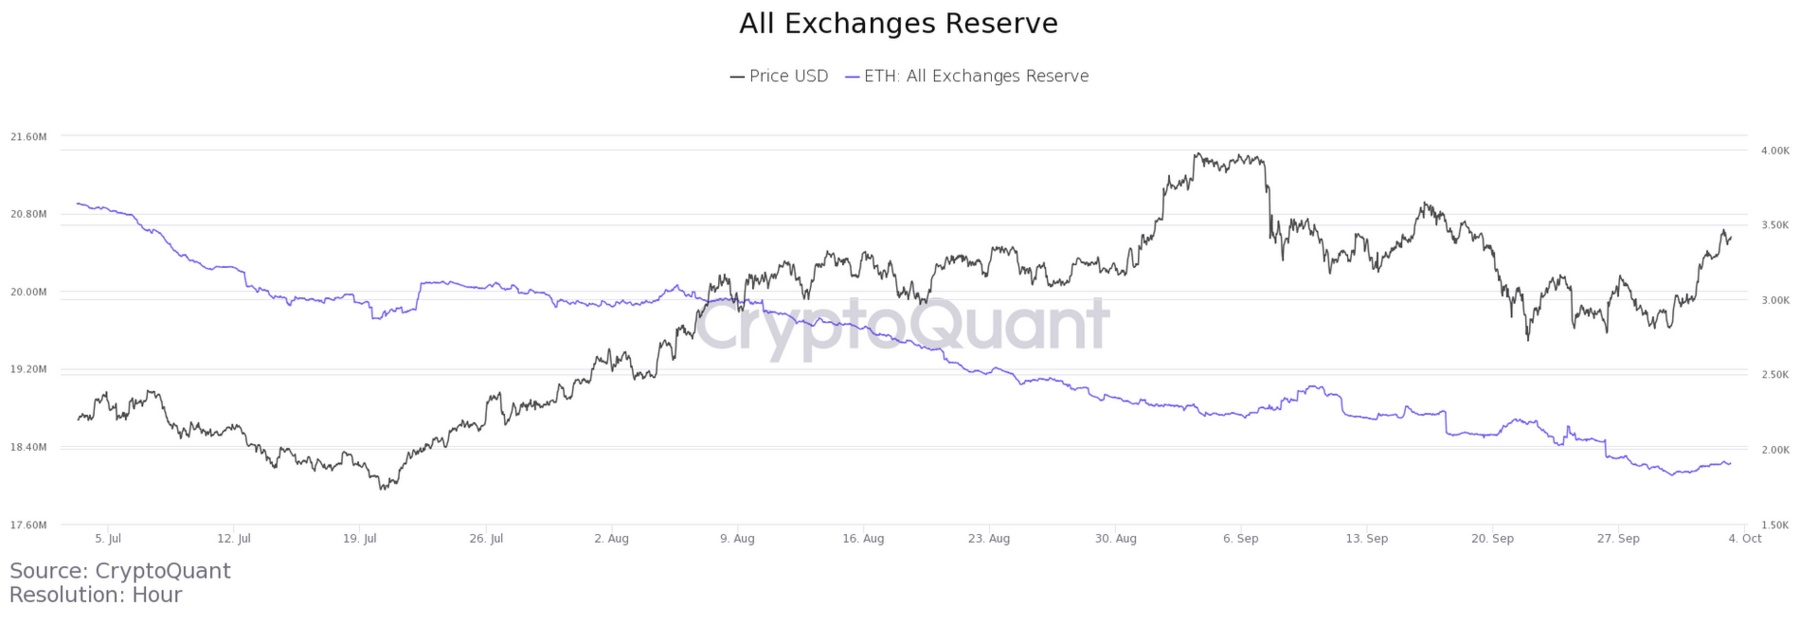 All exchange reserves